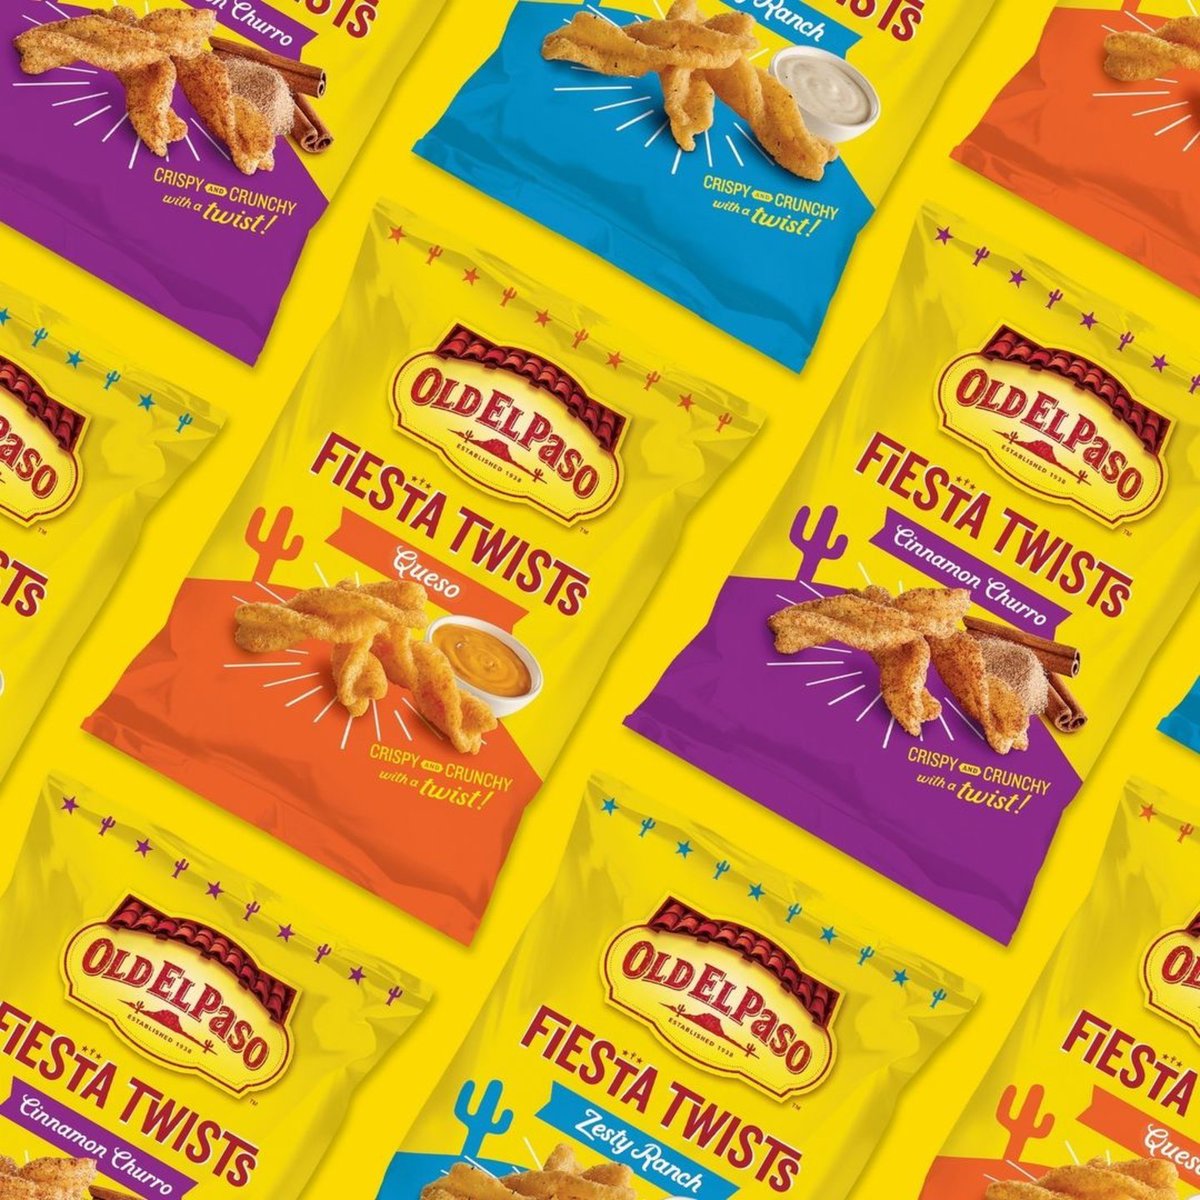 Introducing NEW @oldelpaso Fiesta Twists, the brand's first foray into the snack aisle. 😋 This new, twisty snack comes in three delicious flavors - Queso, Zesty Ranch and Cinnamon Churro! Available now at @Walmart.